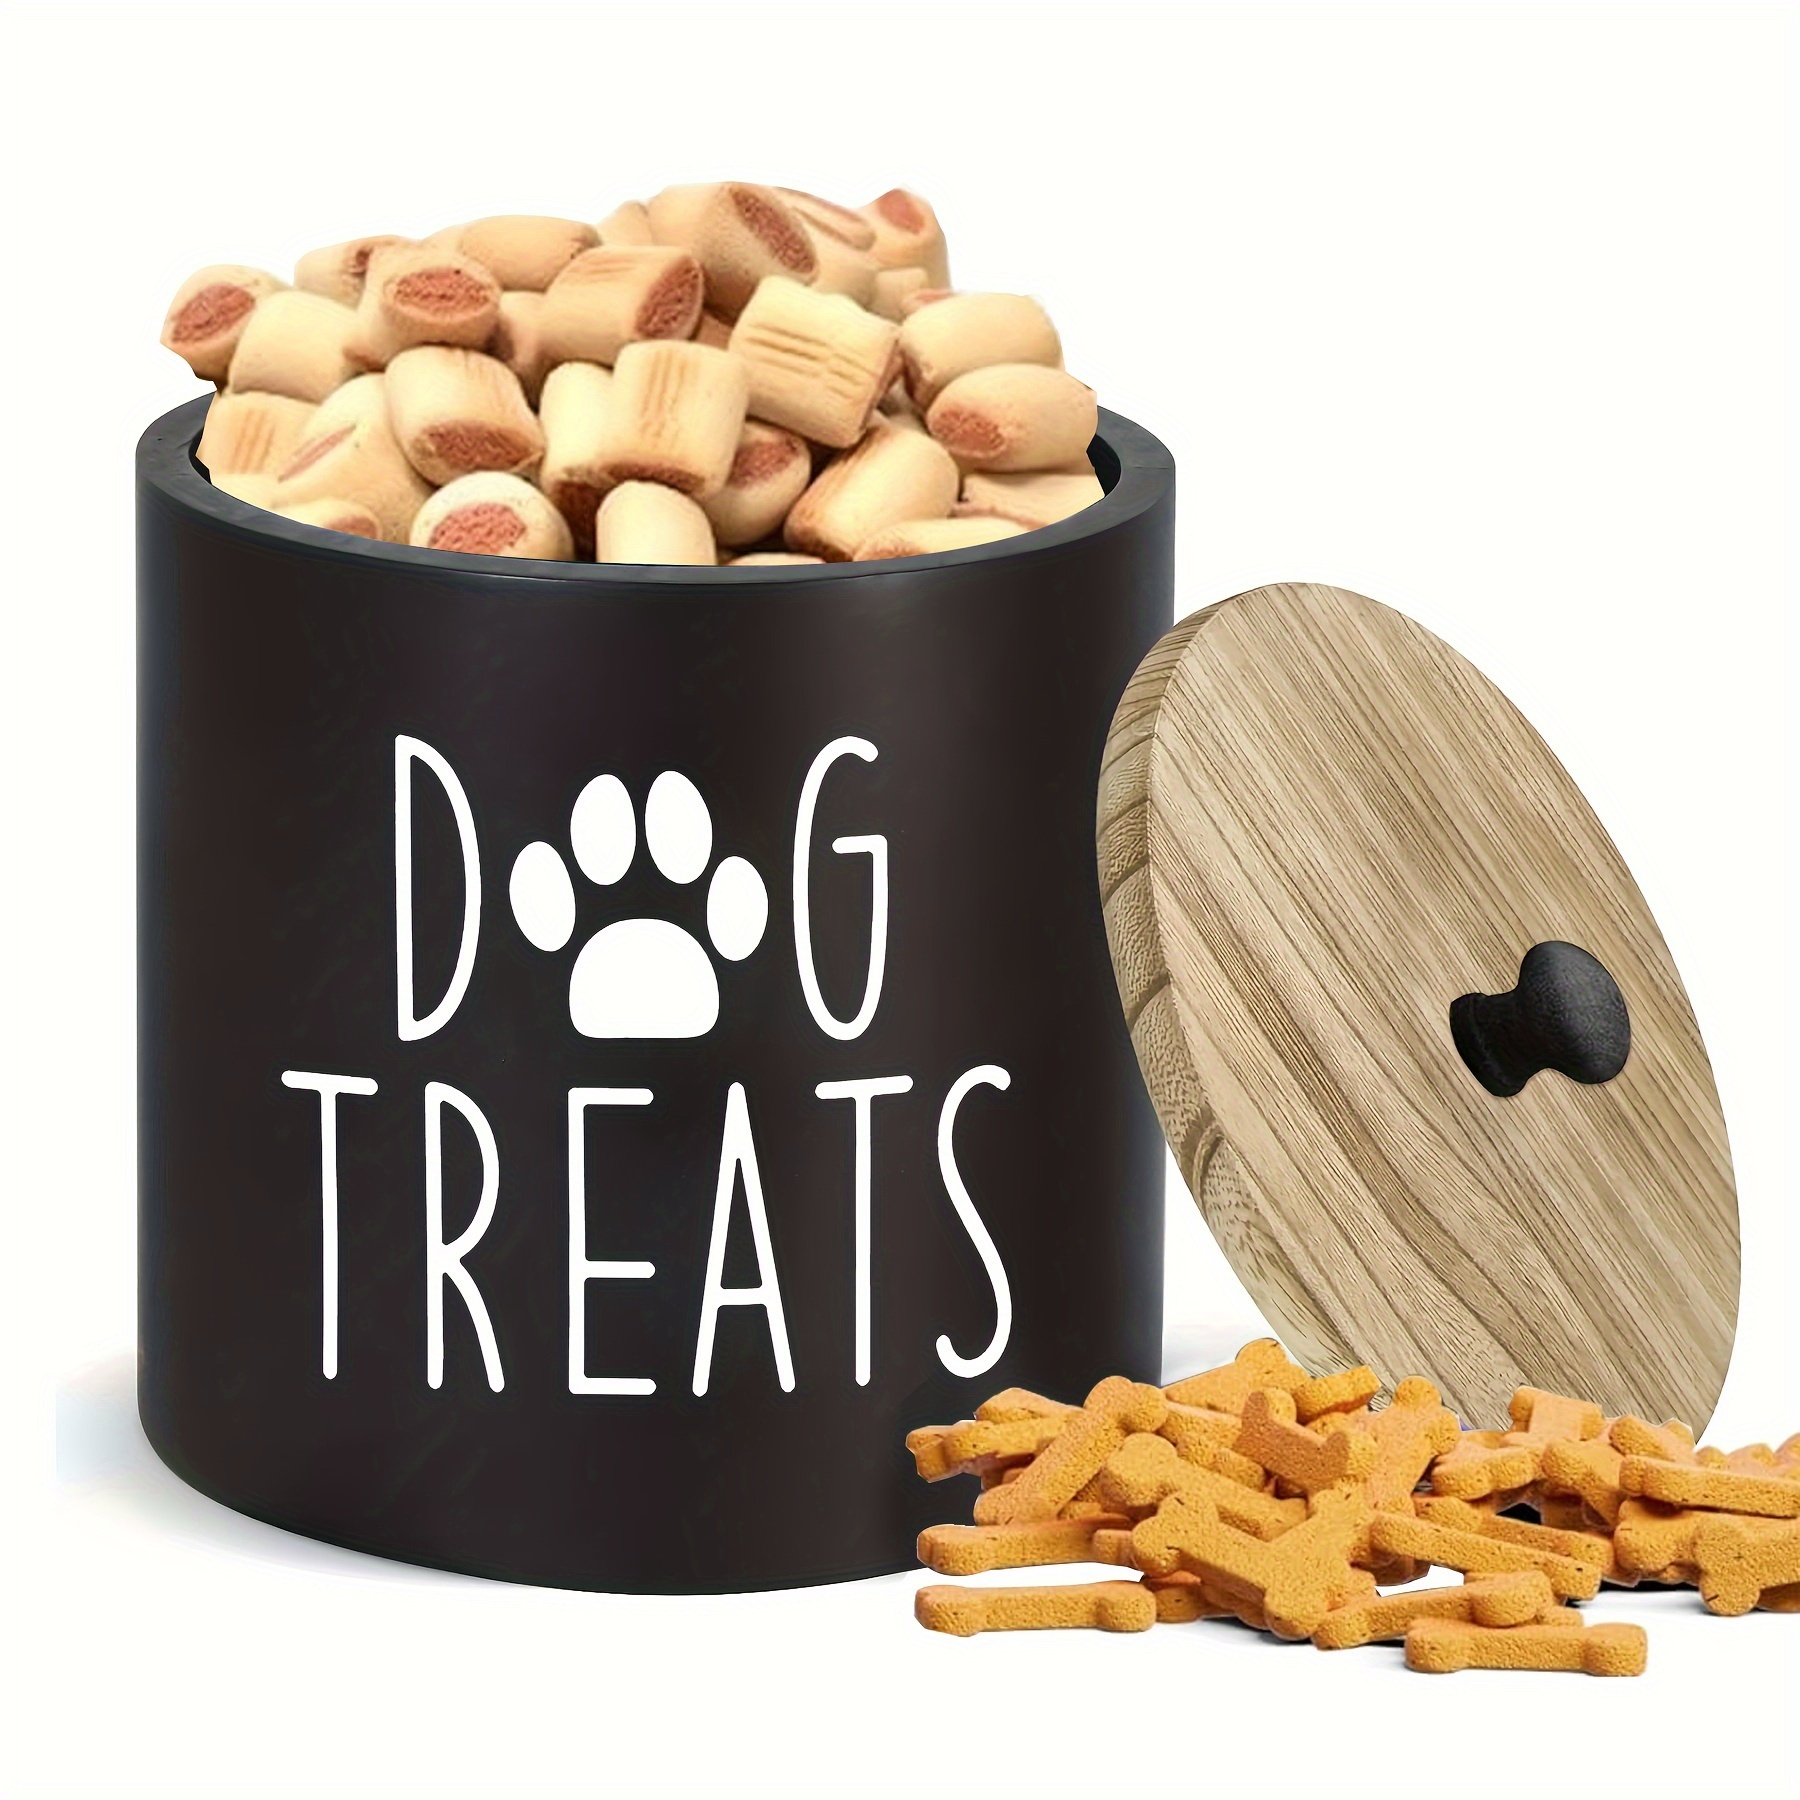 

1pc Wooden Lid Pet Treat Storage Canister, Rustic Black Round Container, Dog Treat Jar, Perfect For Small Dogs & Cats, Secure Lid, Kitchen Counter Organizer